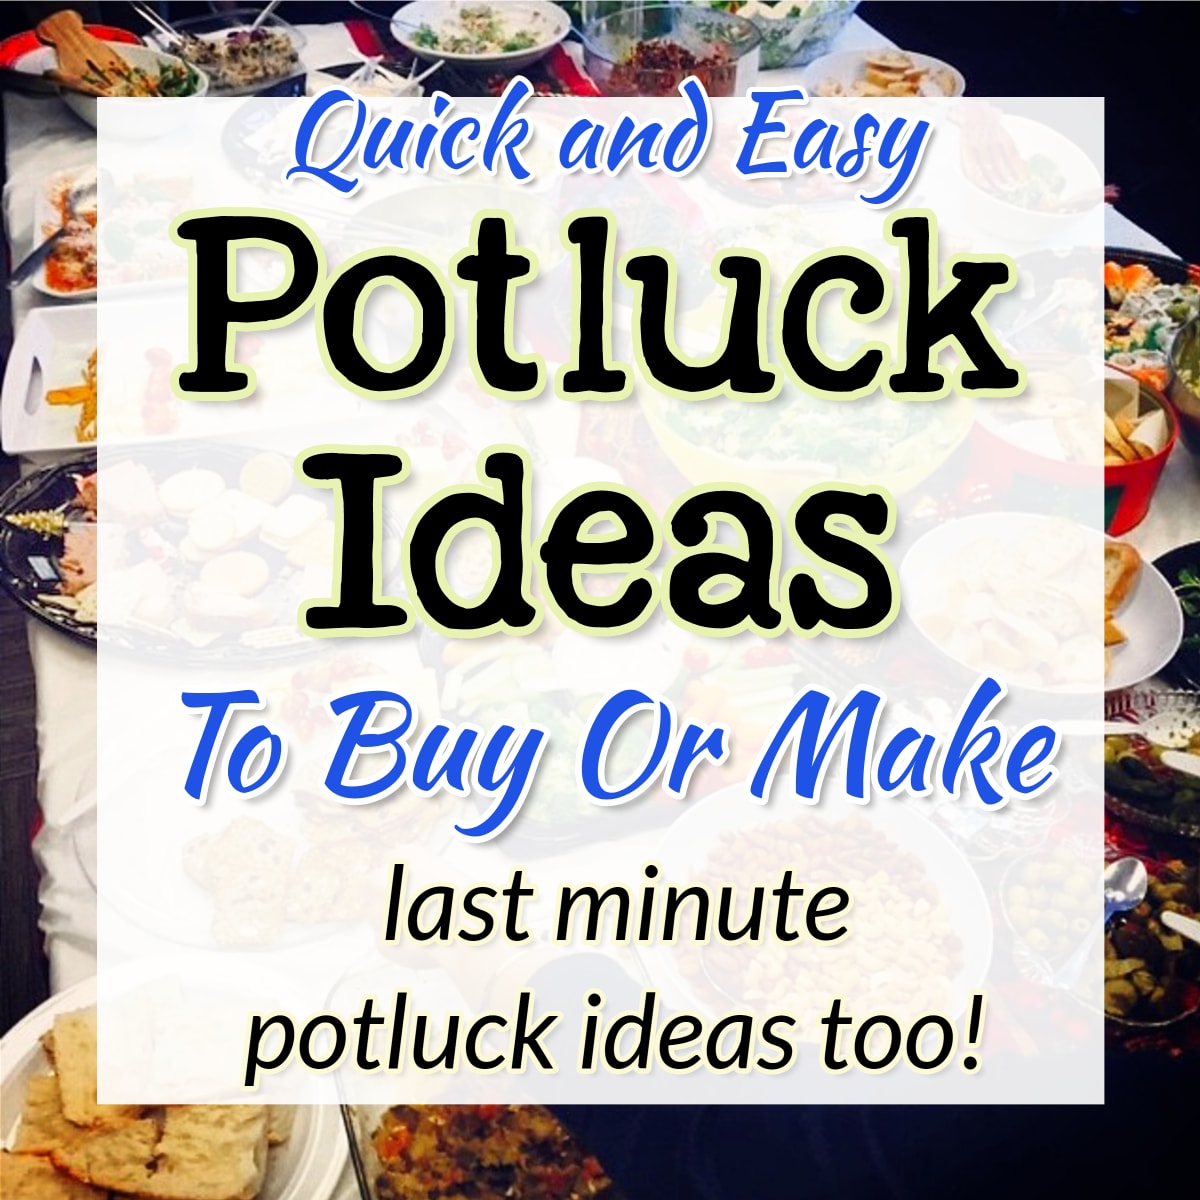 Potluck Ideas - Last minute potluck ideas to buy or make for breakfast, brunch or office potluck. Lots of cheap potluck food ideas and no cook ideas including pasta salad main dishes, sides and appetizers - sports theme and team potluck ideas too